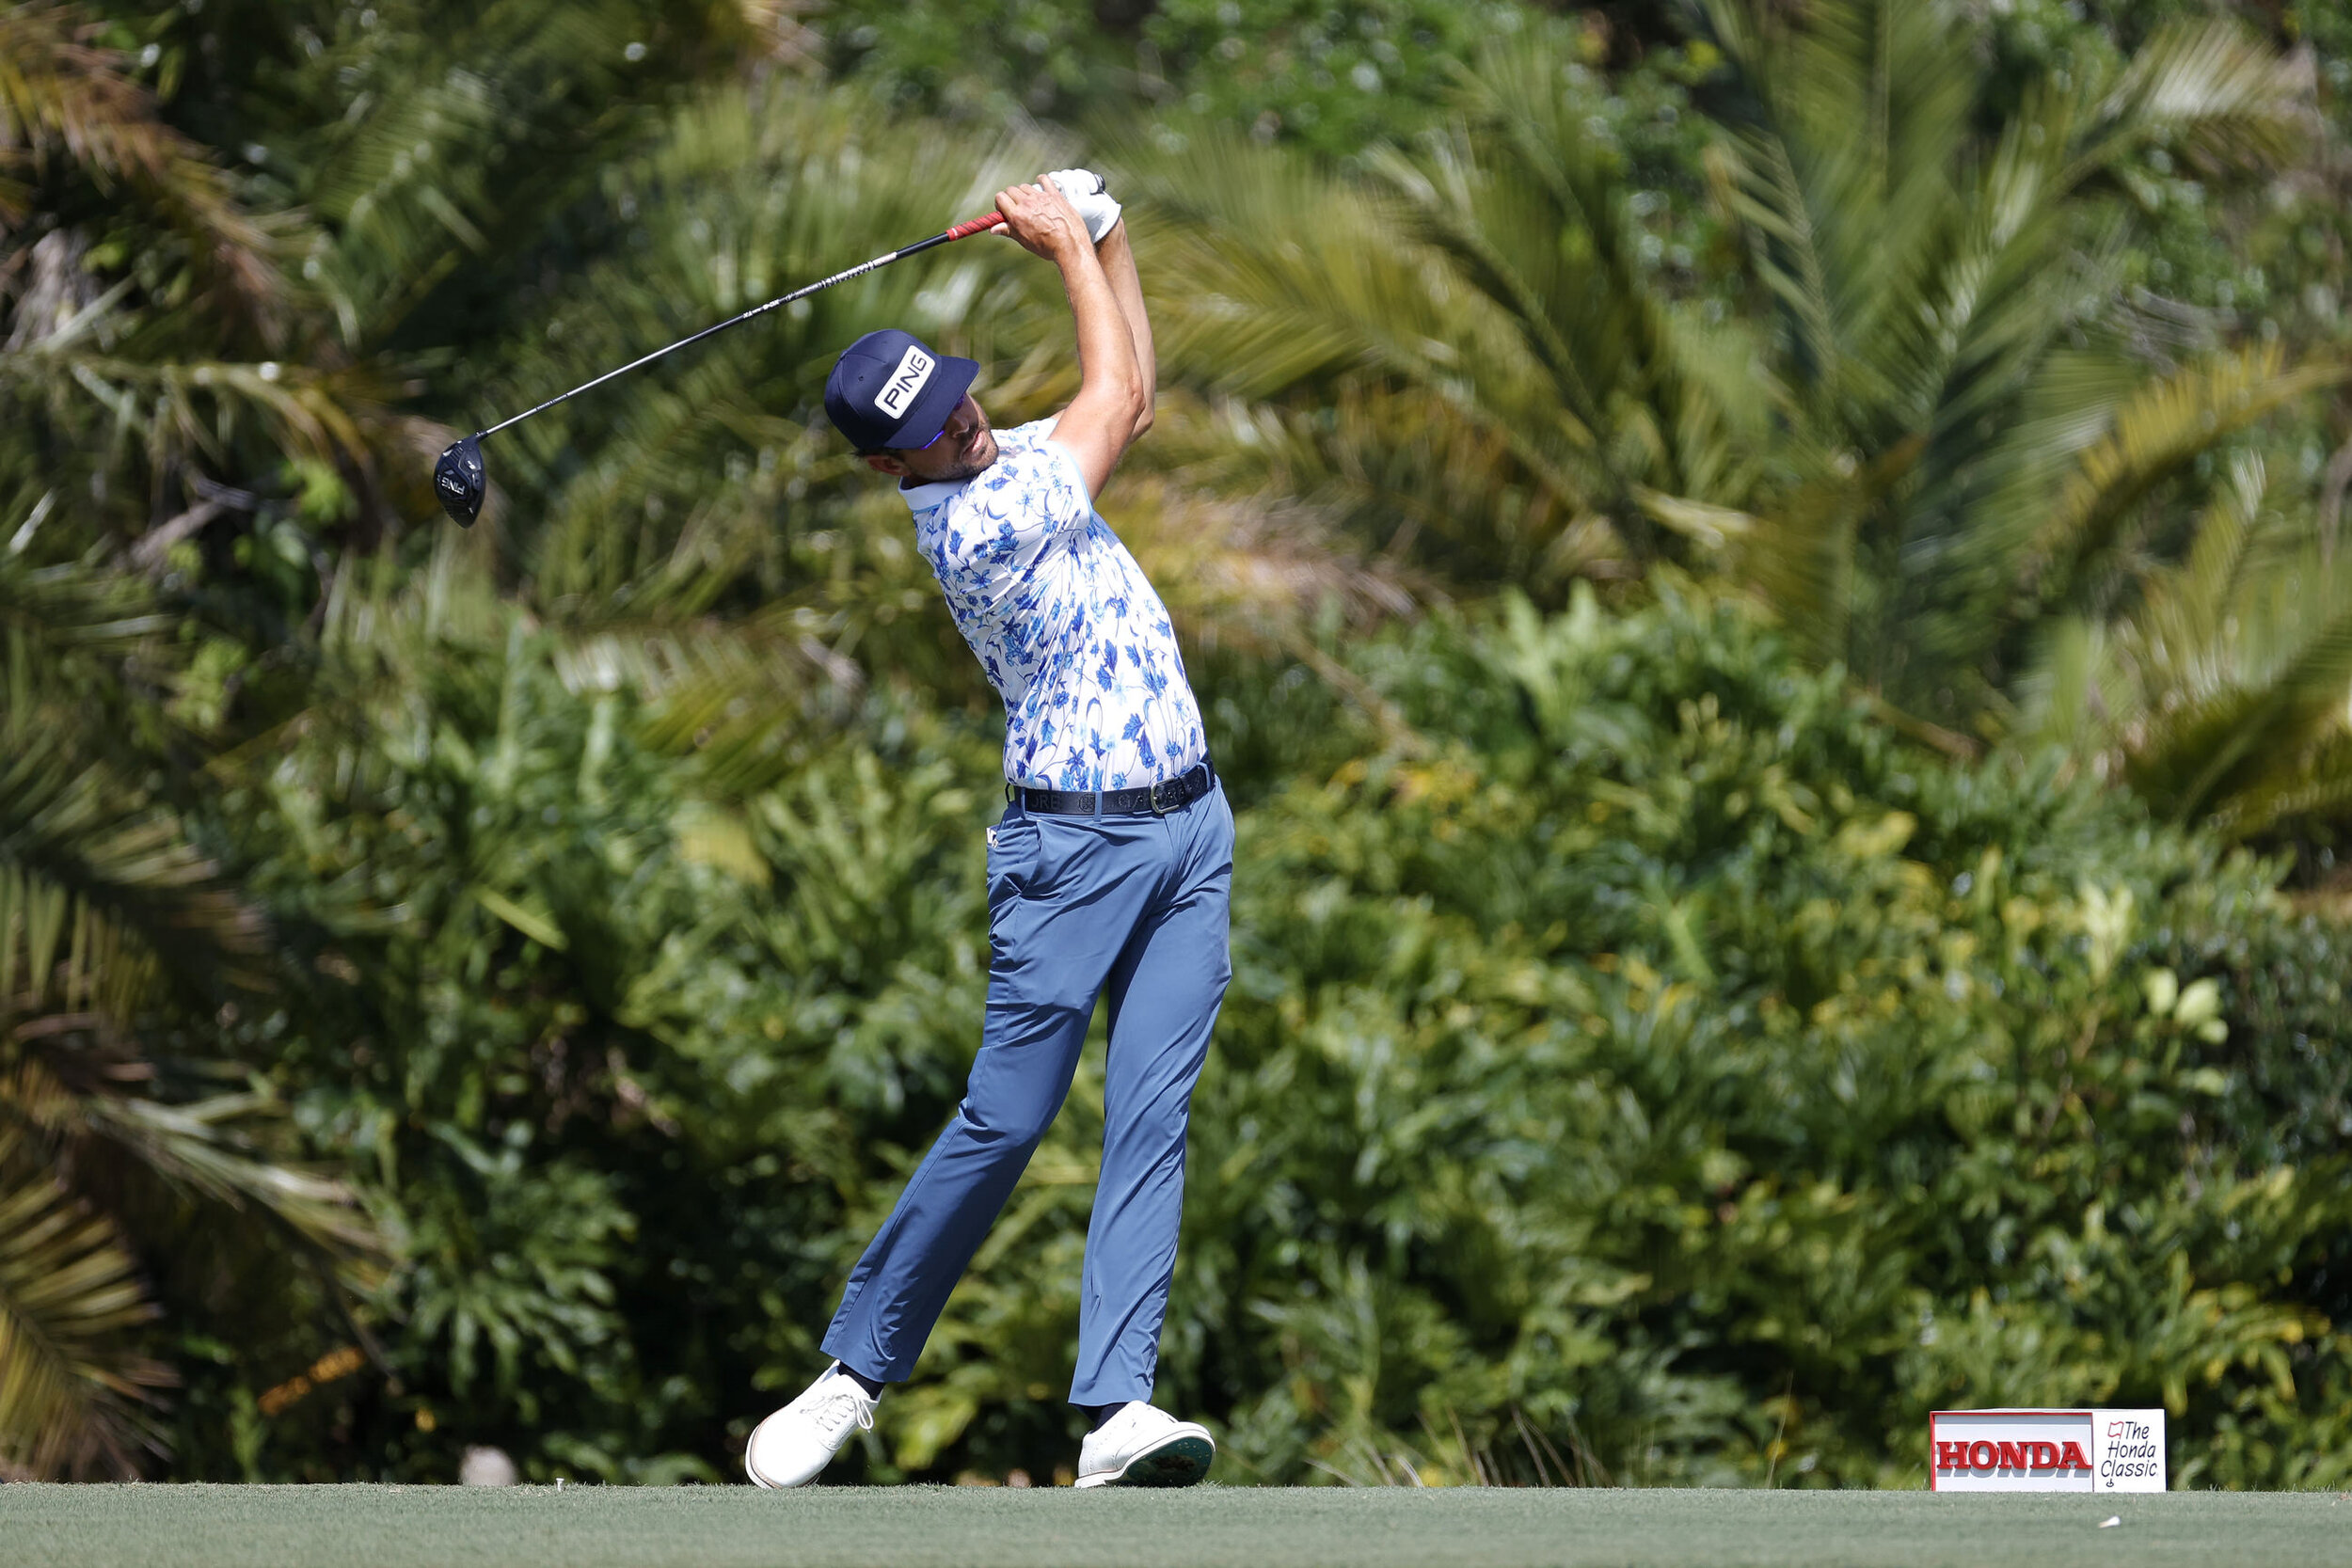  PALM BEACH GARDENS, FLORIDA - MARCH 18: Scott Harrington
of the United States plays his shot from the eighth tee during the first round of The Honda Classic at PGA National Champion course on March 18, 2021 in Palm Beach Gardens, Florida. (Photo by 